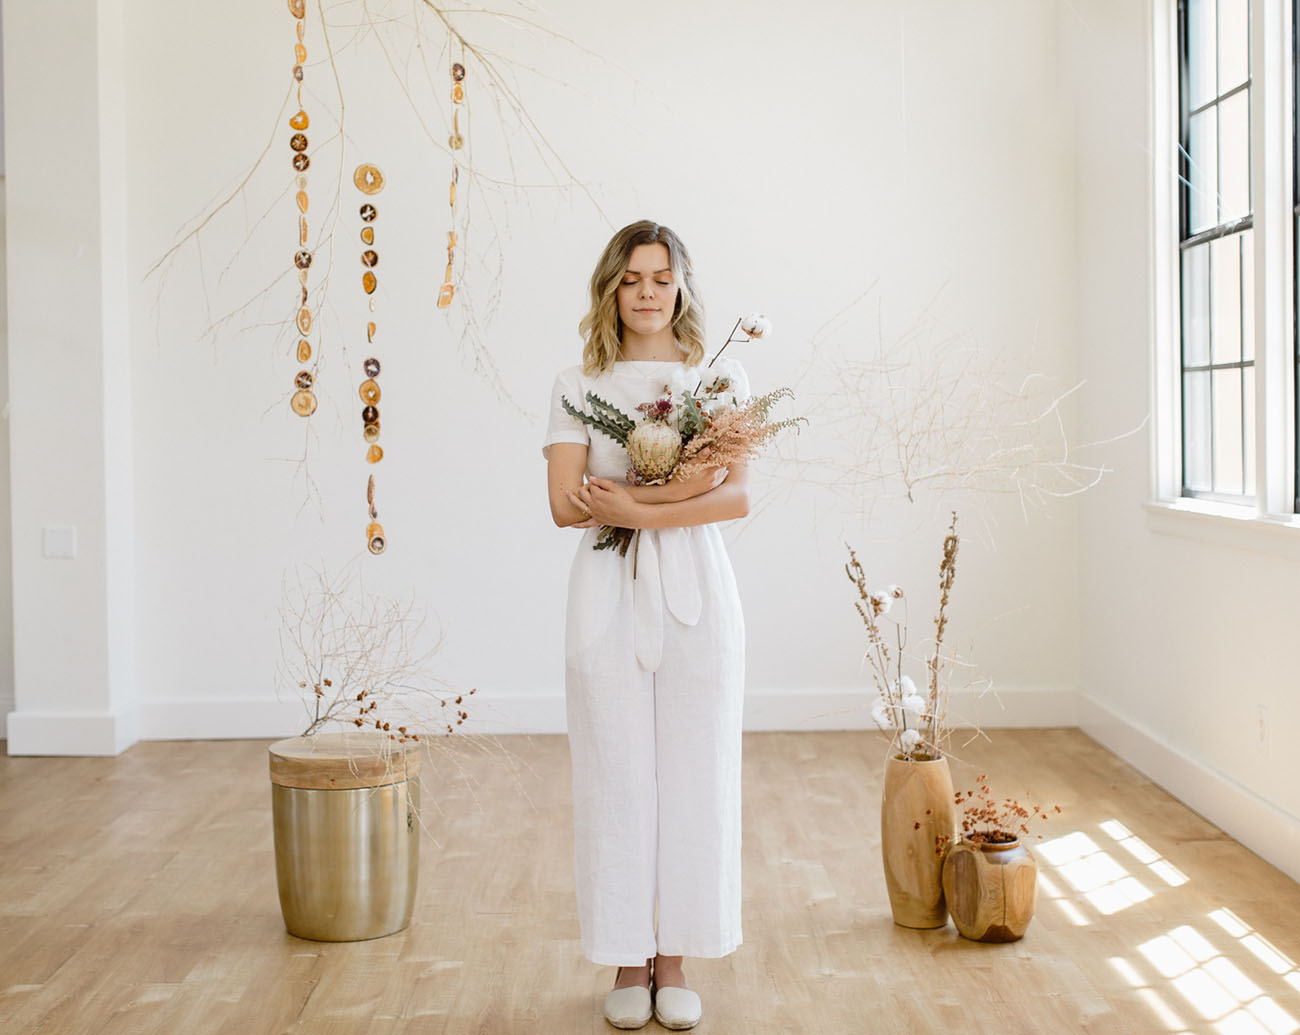 The bride was first wearing a handmade white linen suit and flats for a minimalist feel